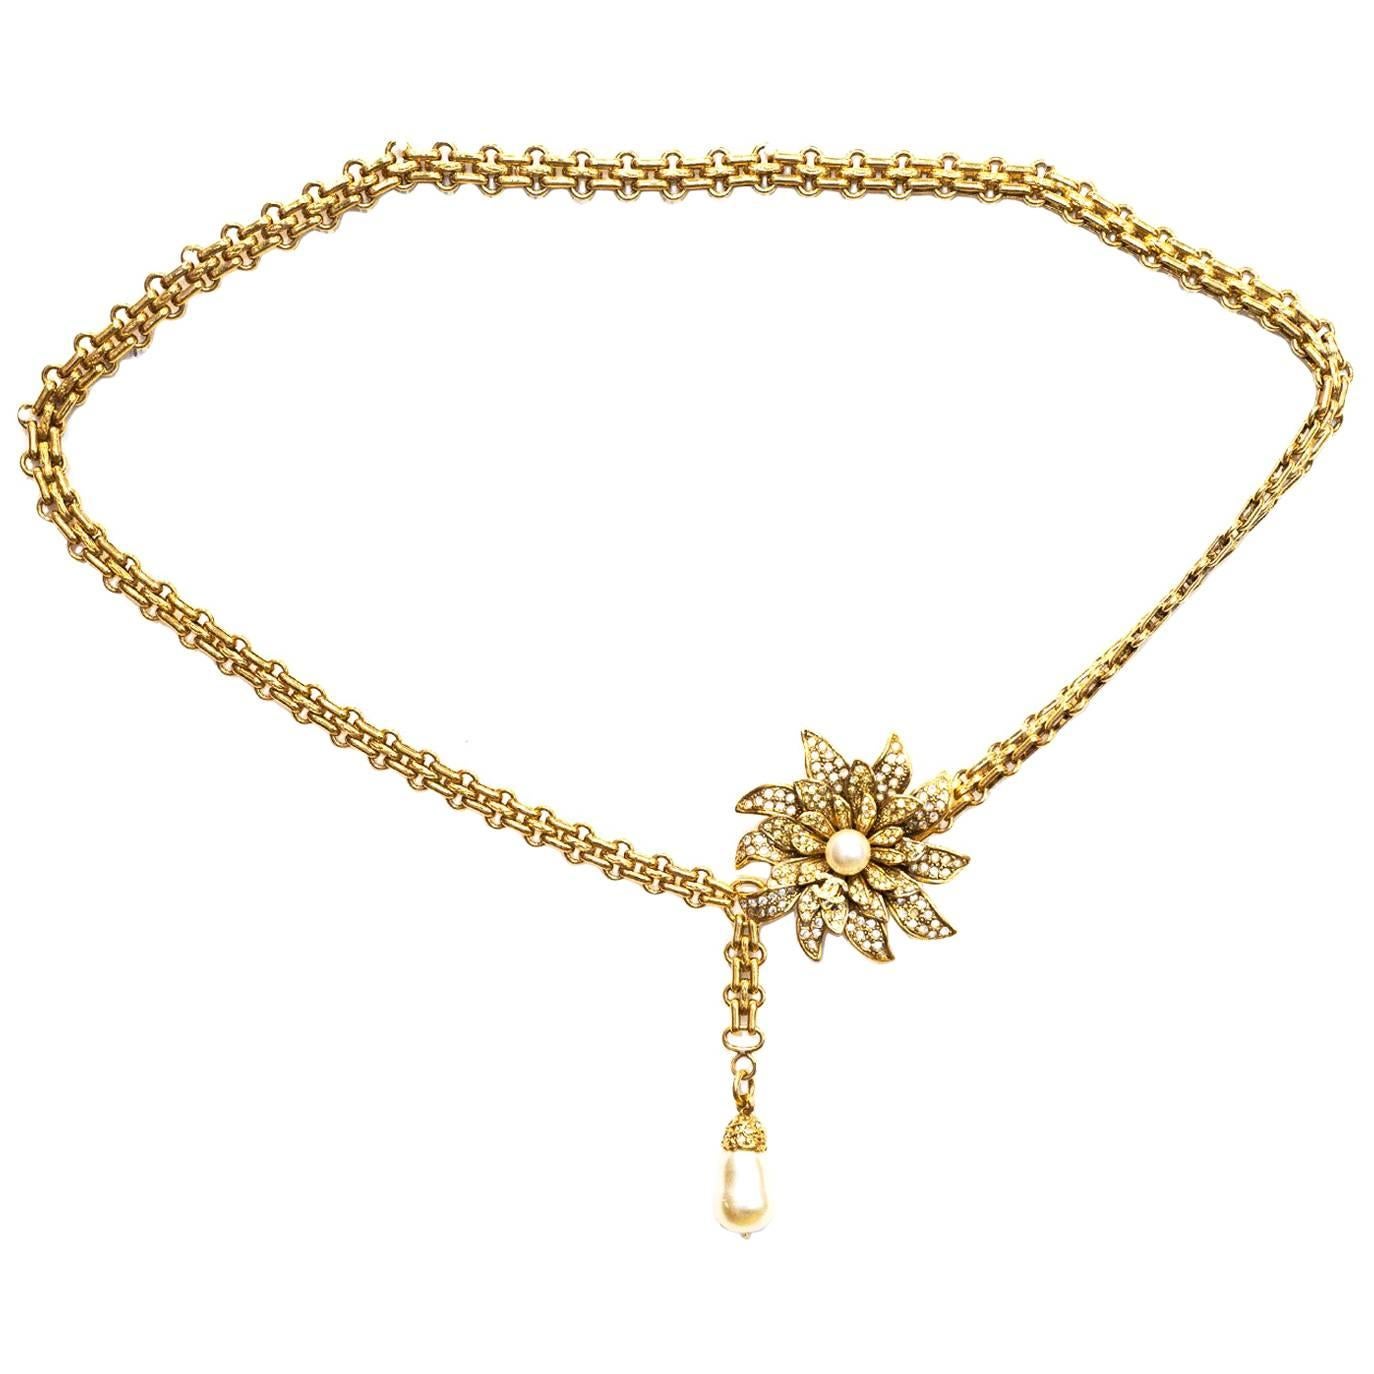 Chanel Goldtone Chainbelt with Pave Crystal Flower